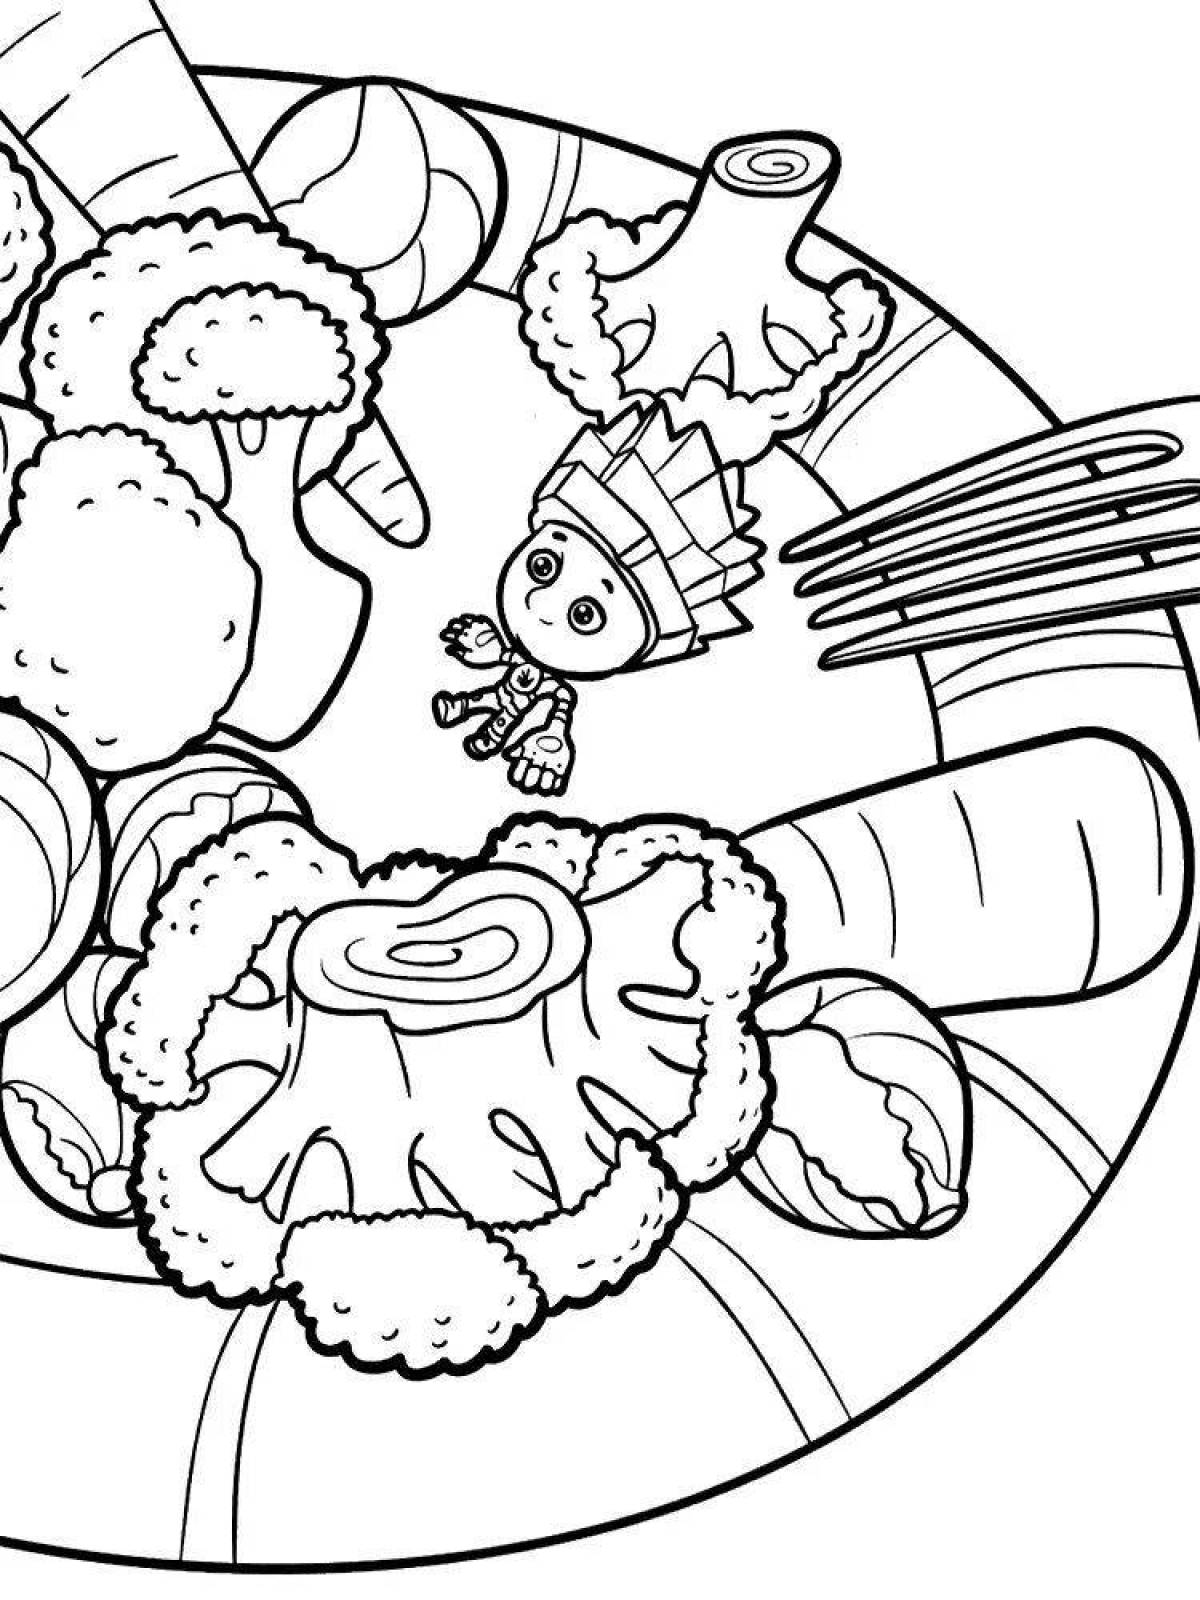 Coloring page festive tasty and point